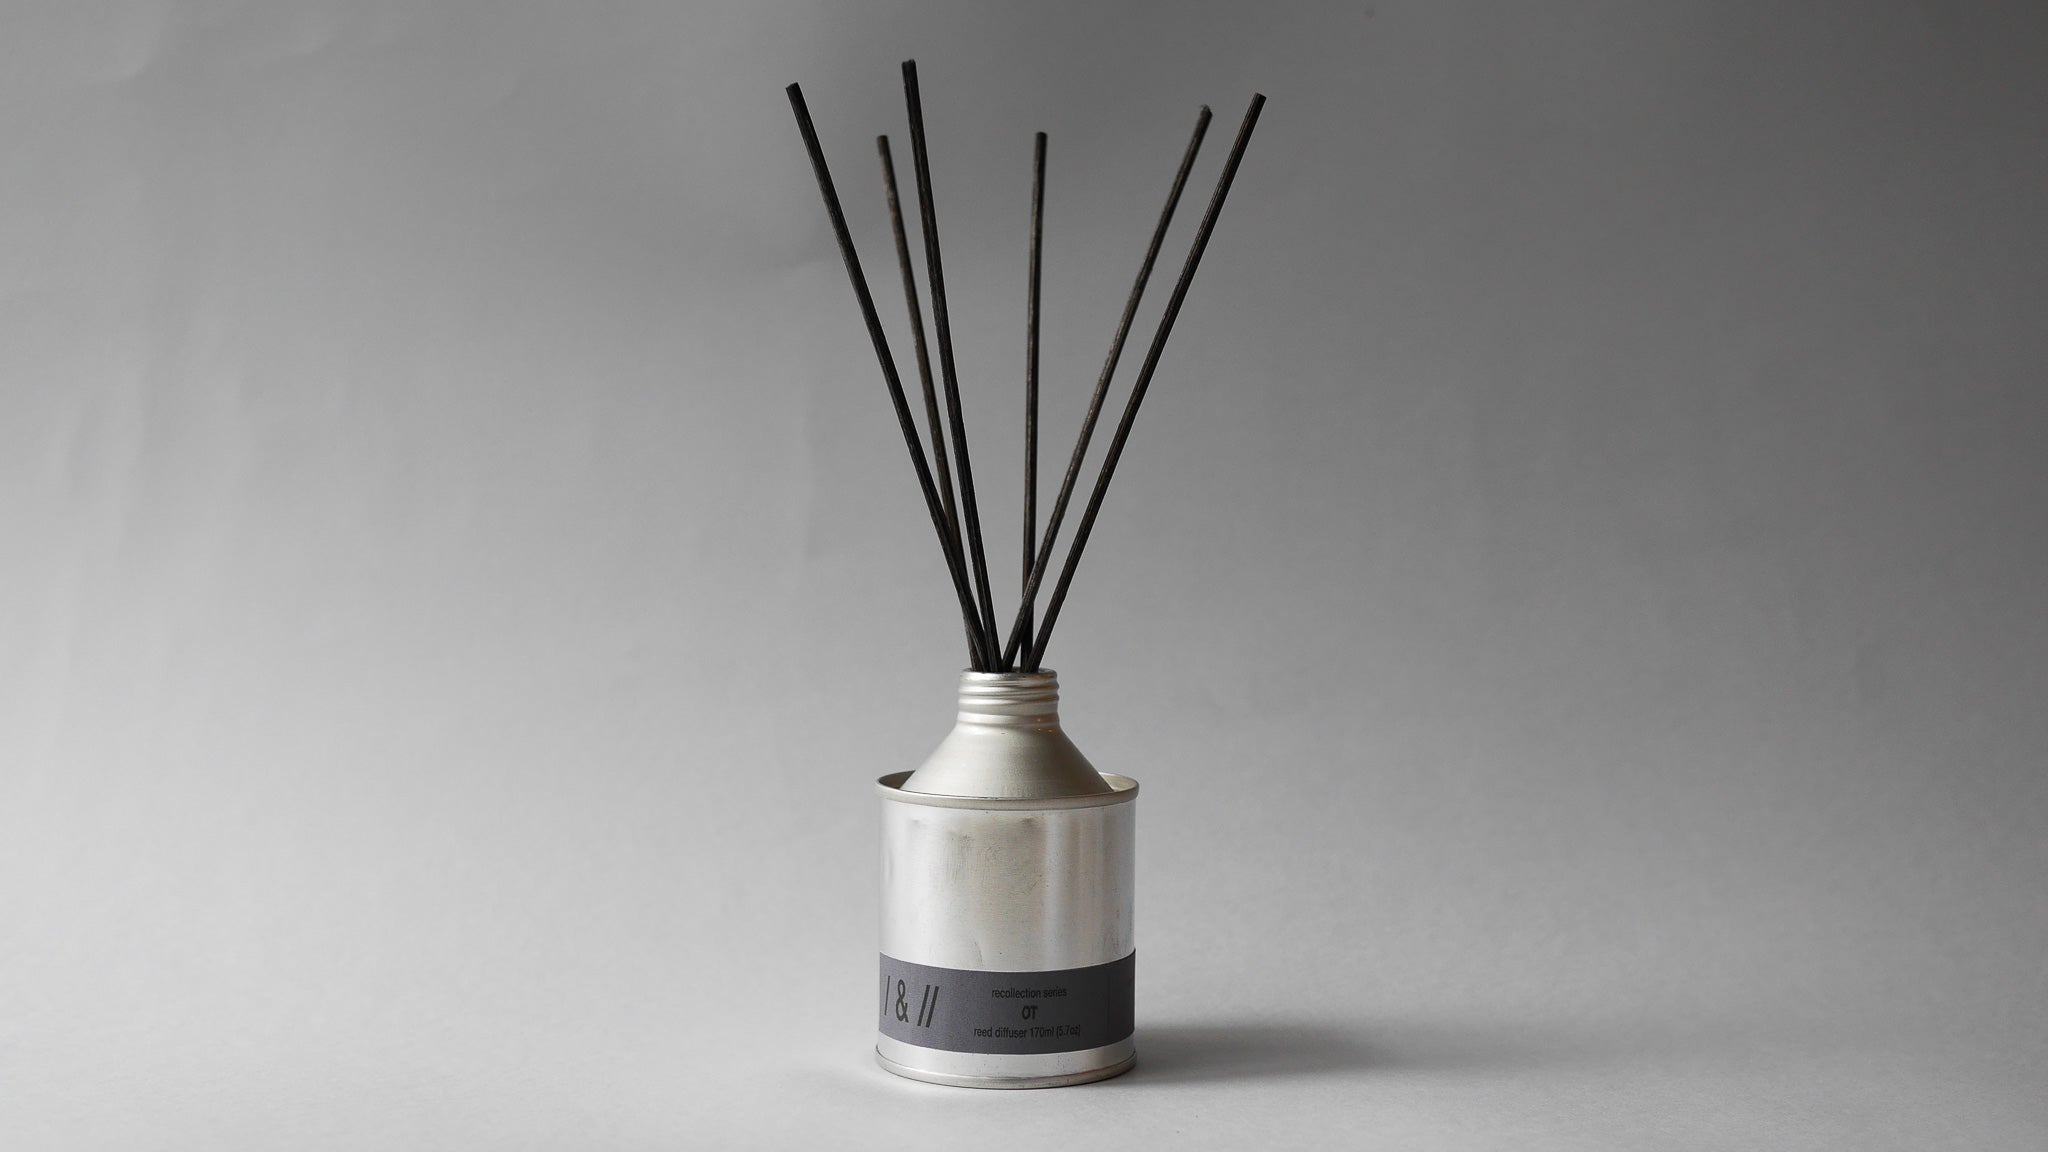 OT / reed diffuser 170ml // recollection series